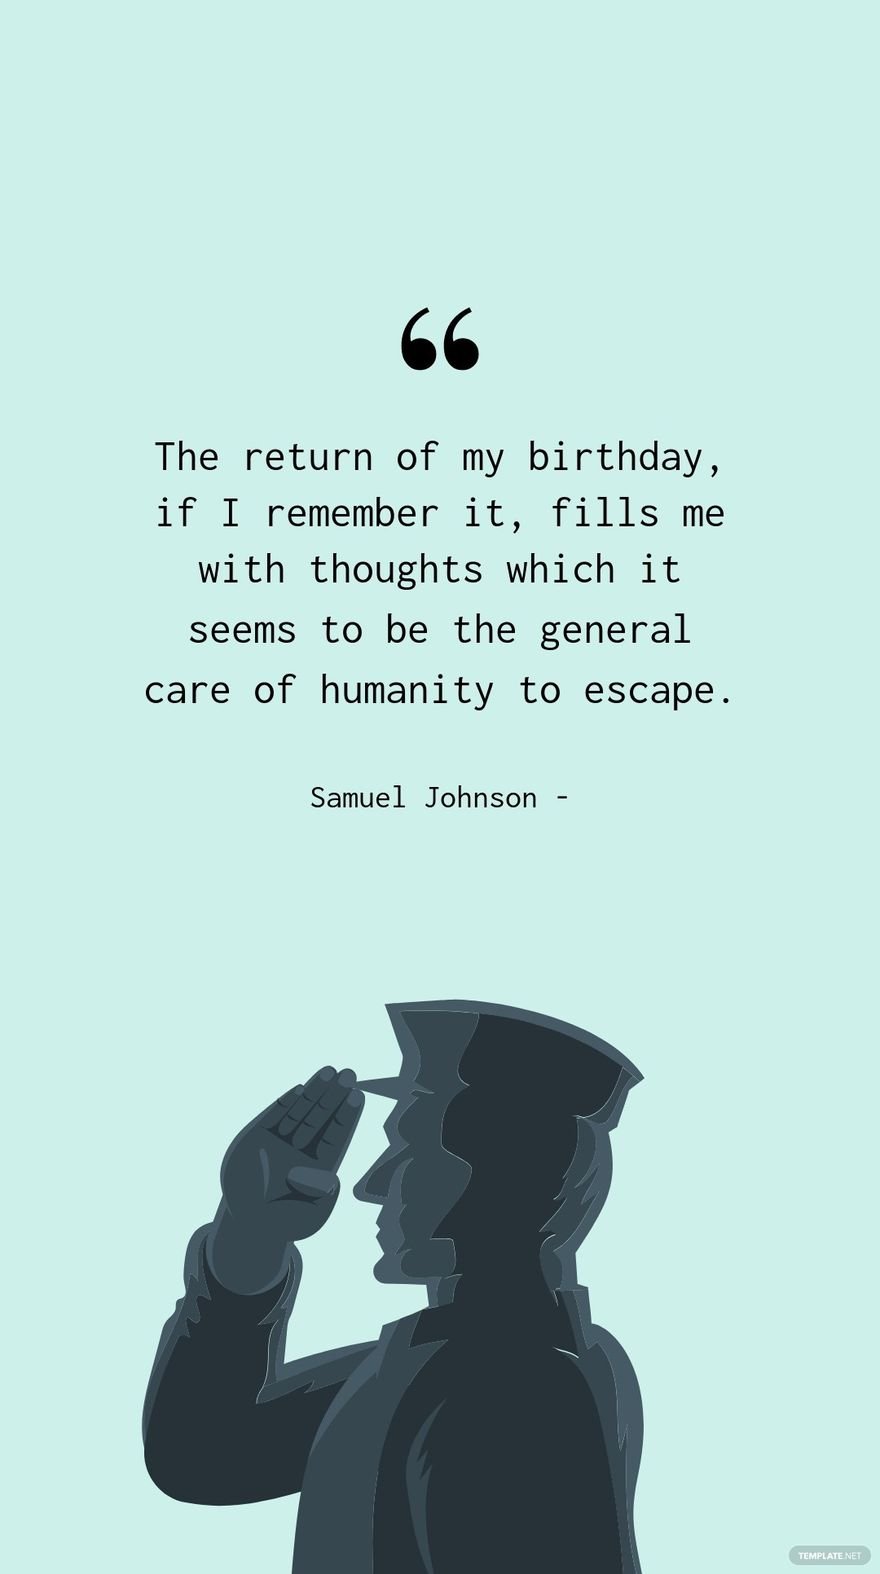 Free Samuel Johnson - The return of my birthday, if I remember it, fills me with thoughts which it seems to be the general care of humanity to escape.